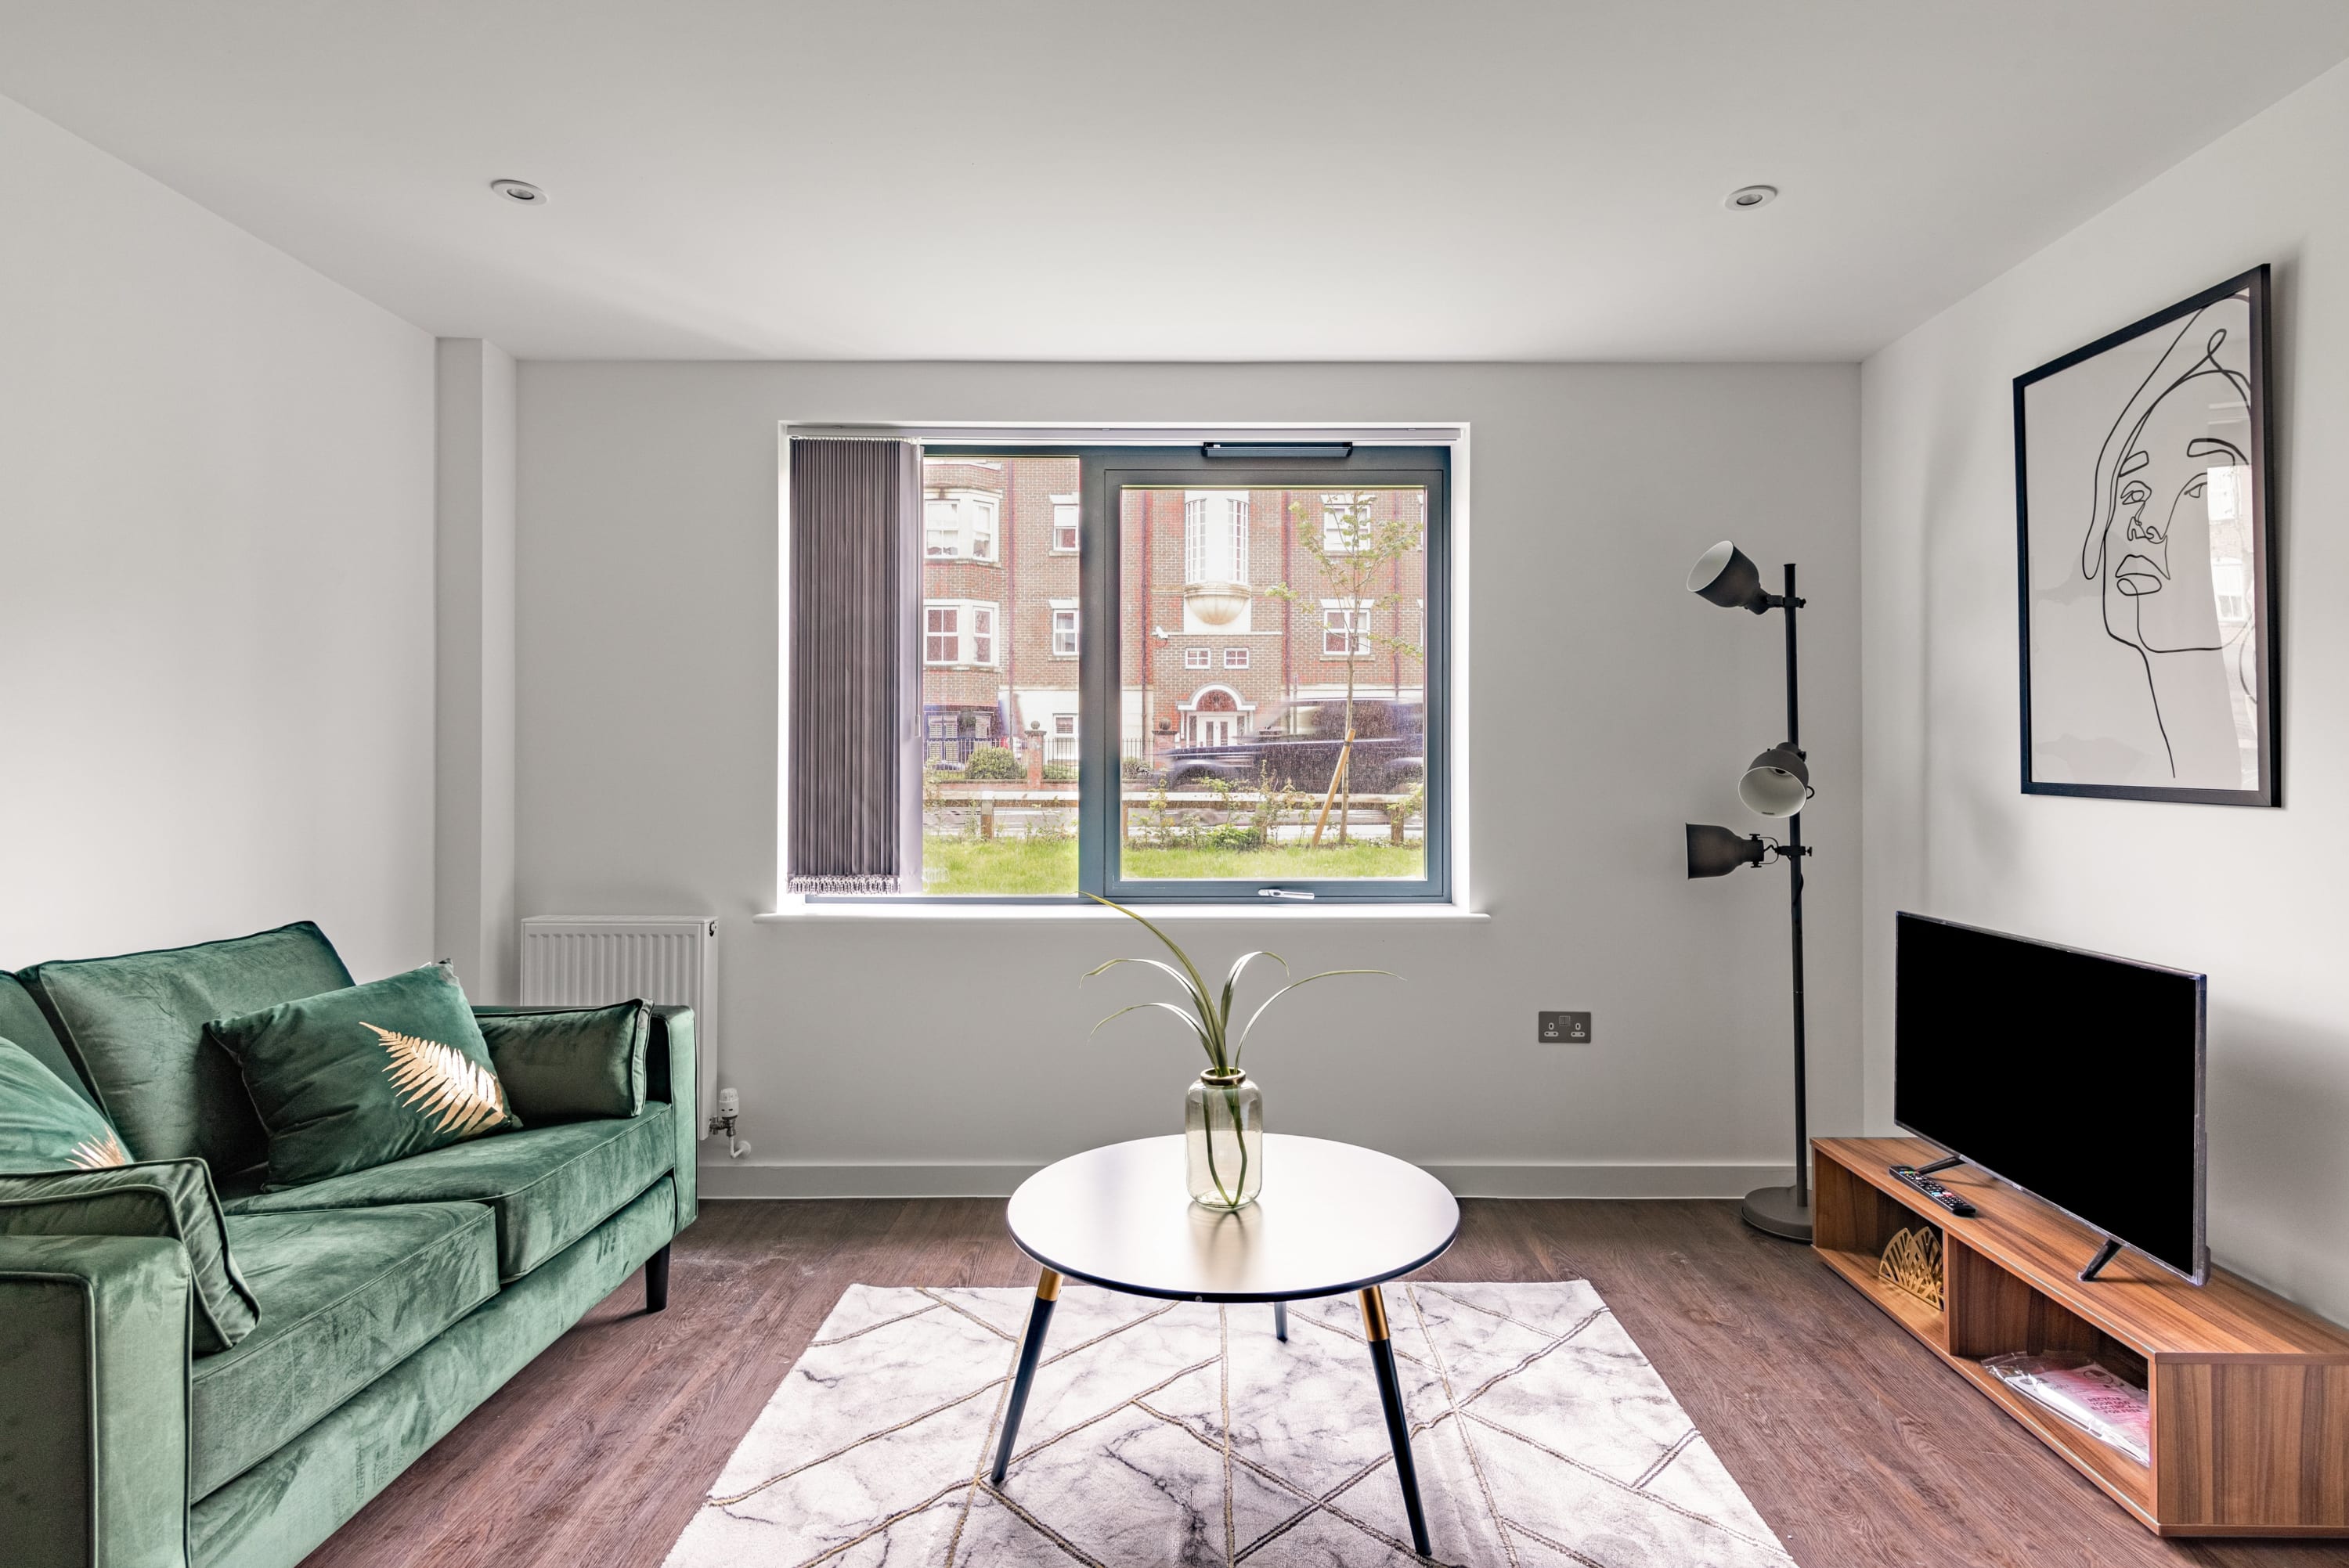 Property Image 1 - Amazing 2 bed apartment in York’s city centre